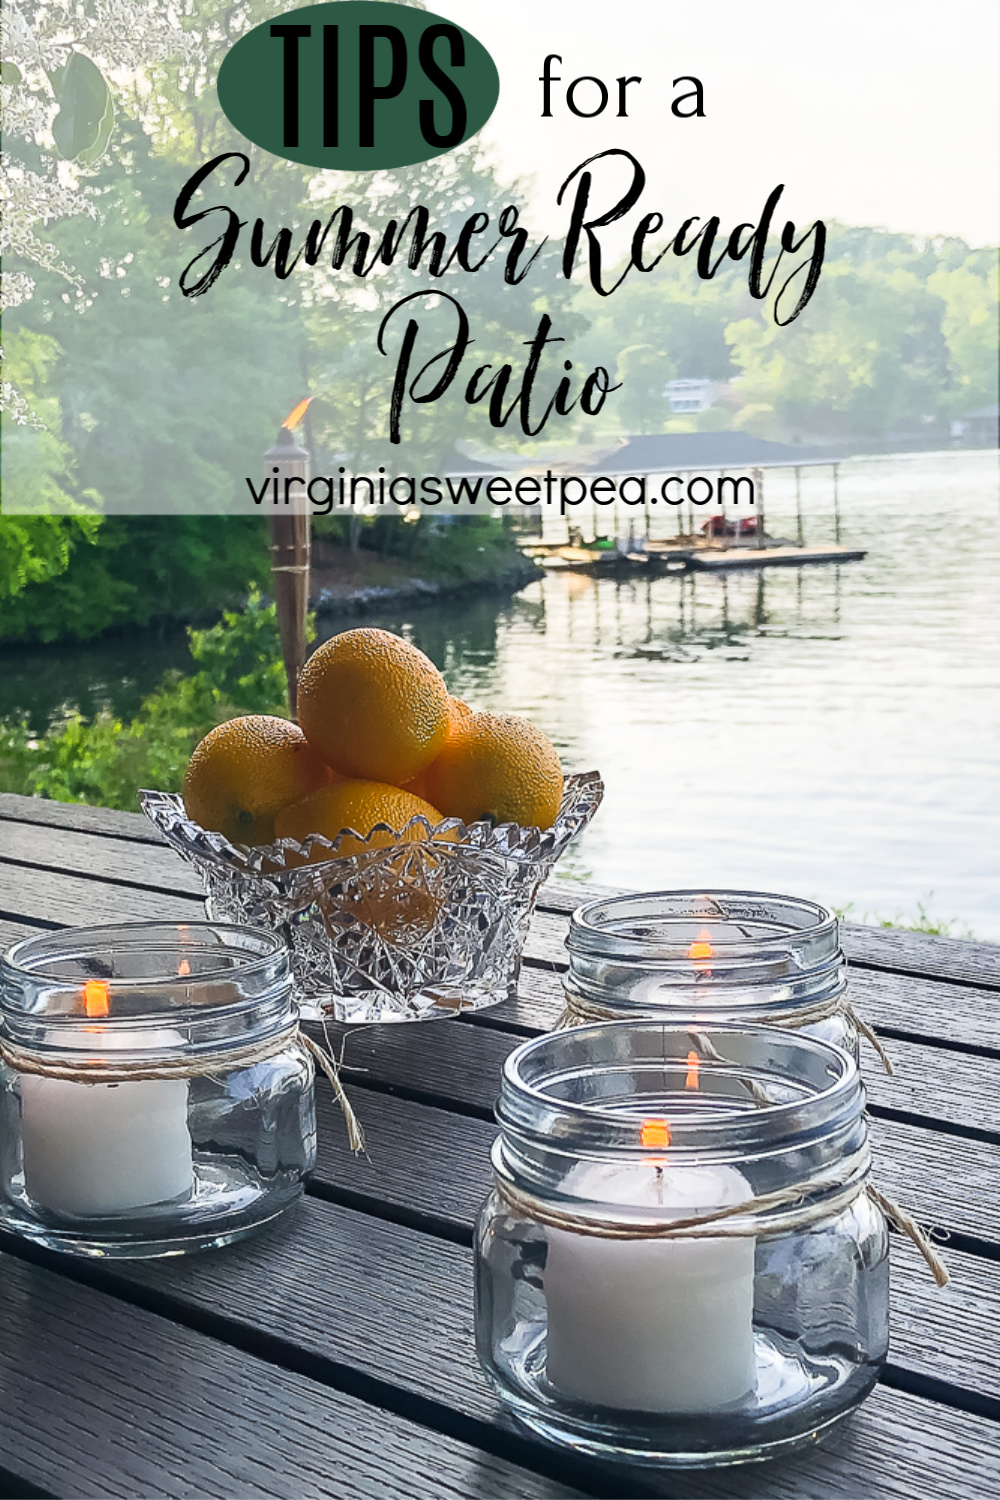 Patio overlooking a lake with candles and a glass bowl filled with lemons.